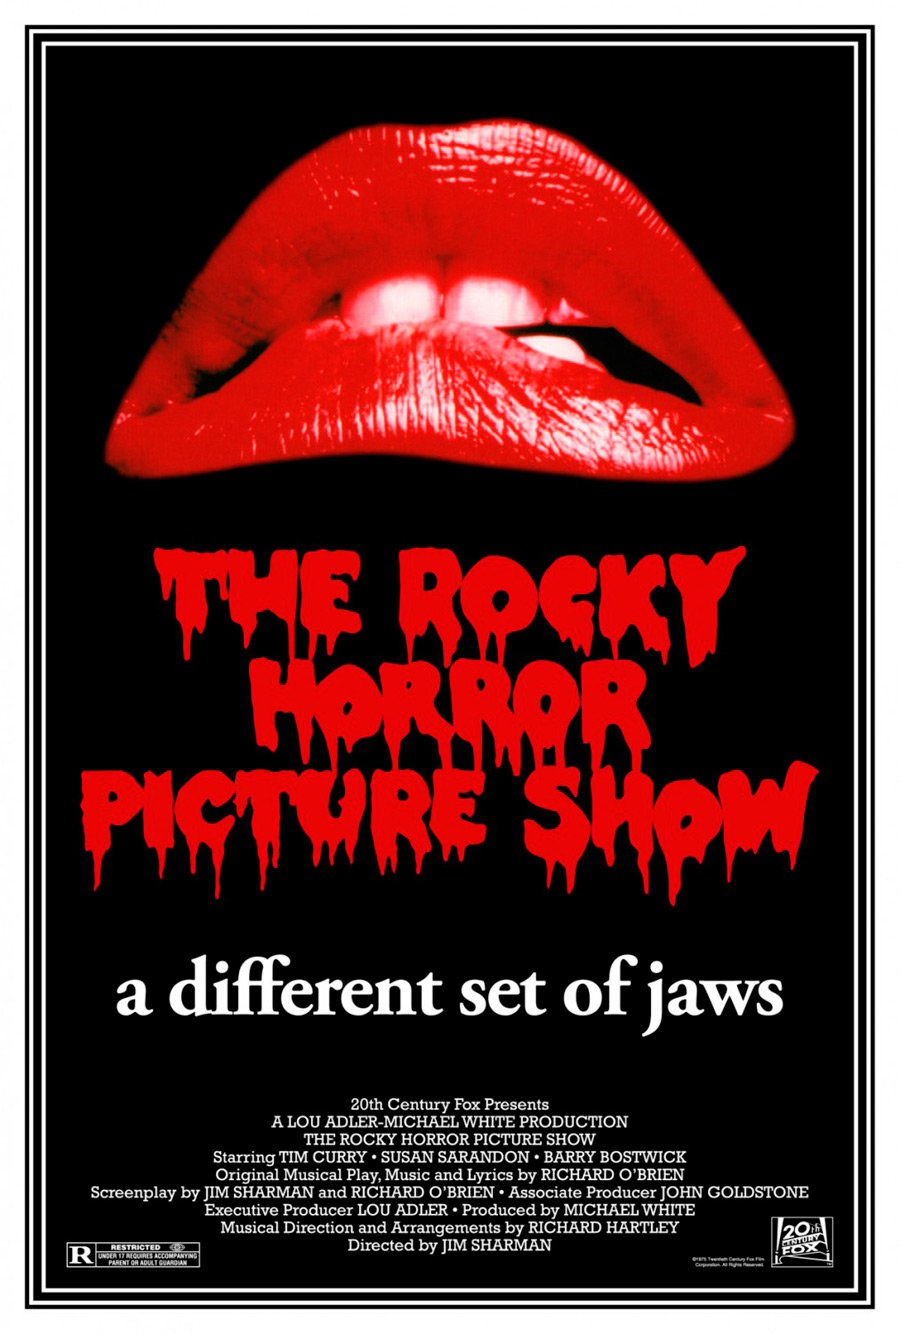 Movies on Tap Presents The Rocky Horror Picture Show